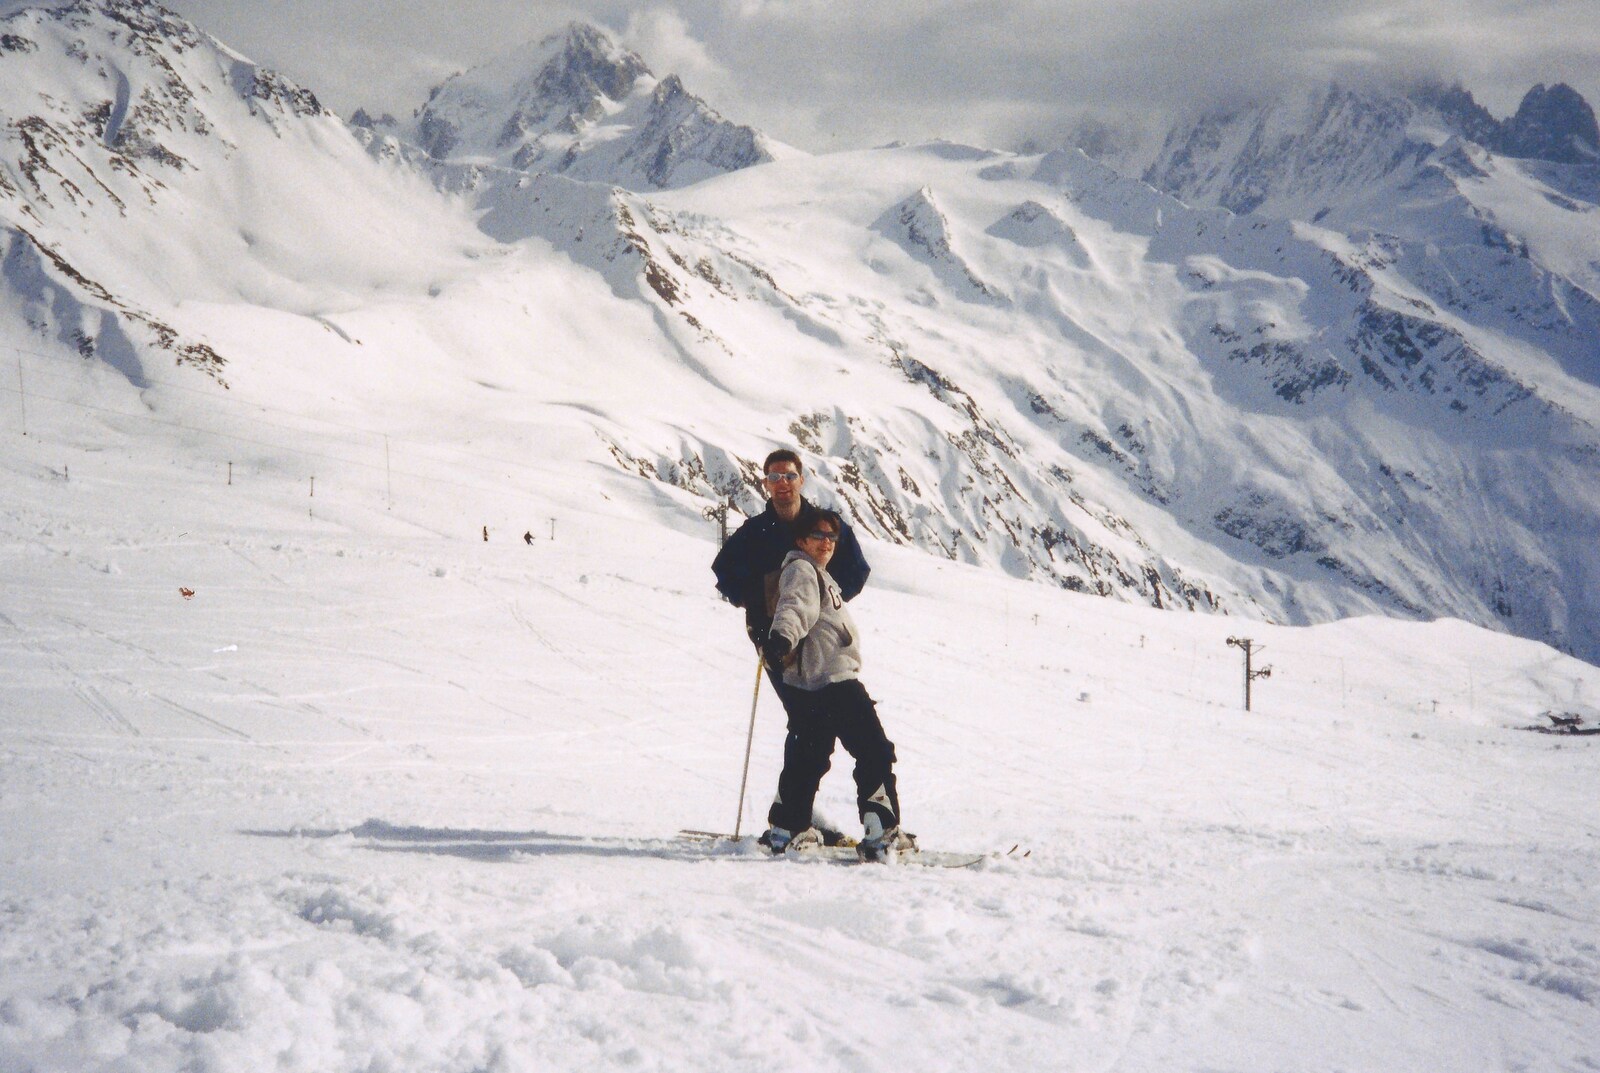 Skiing With Sean, Chamonix, Haute-Savoie, France - 15th March 1999: Sean and Ponge on the ski slopes